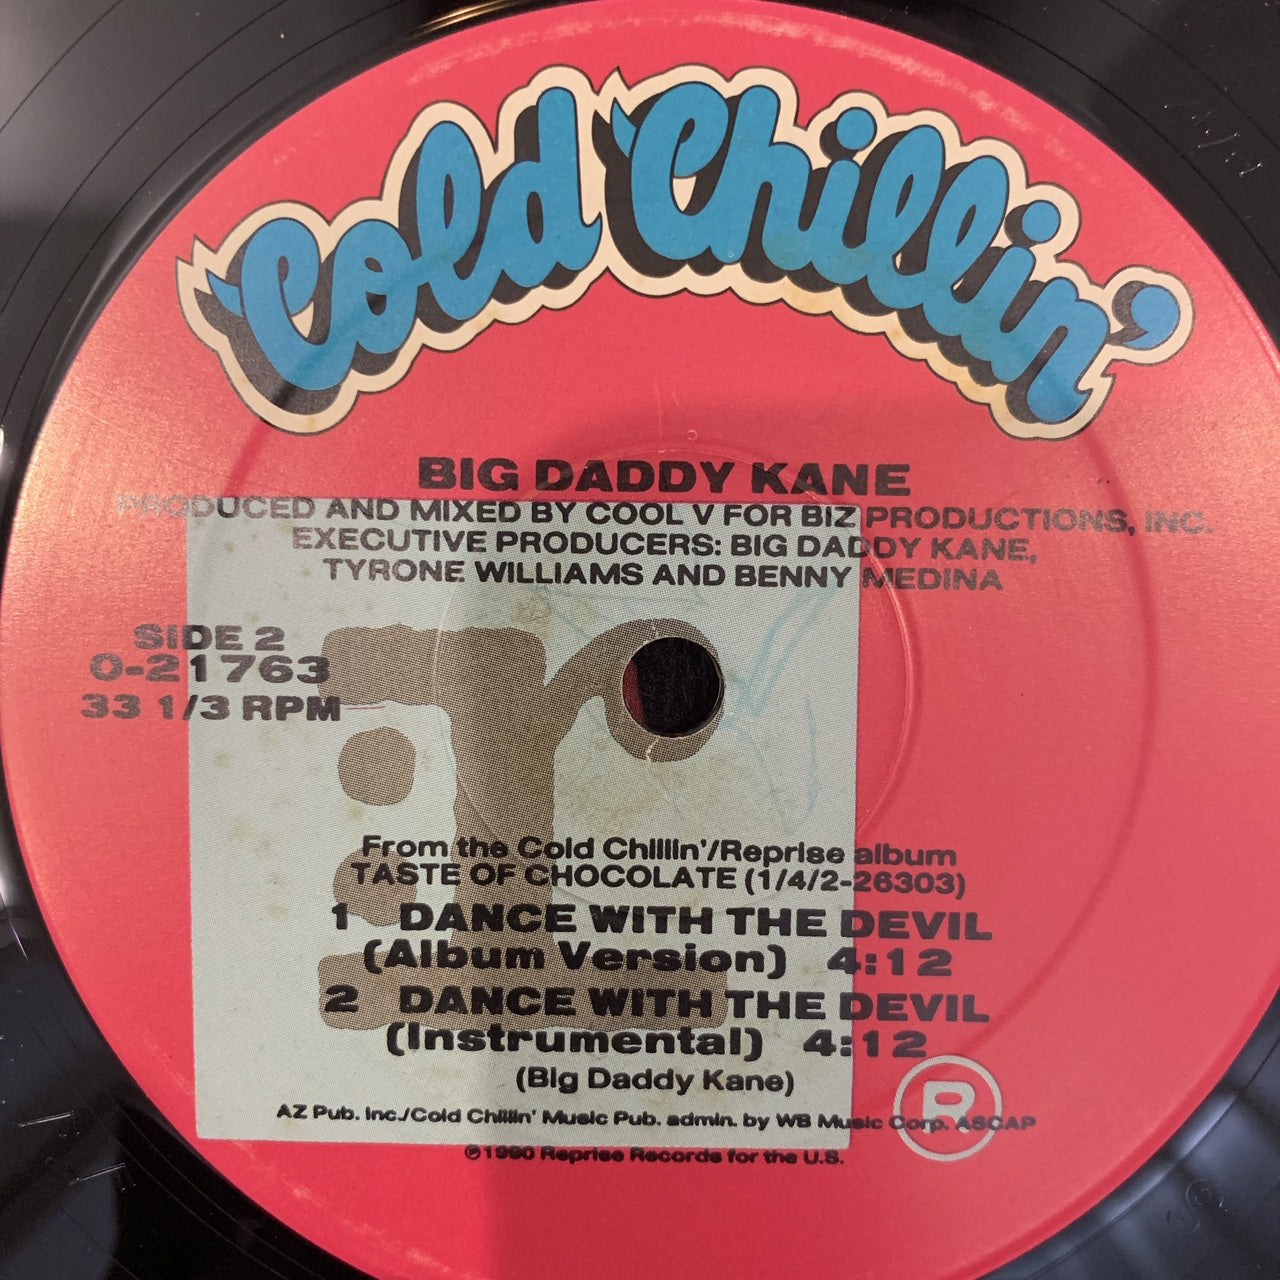 Big Daddy Kane “Cause I Can Do It Right”